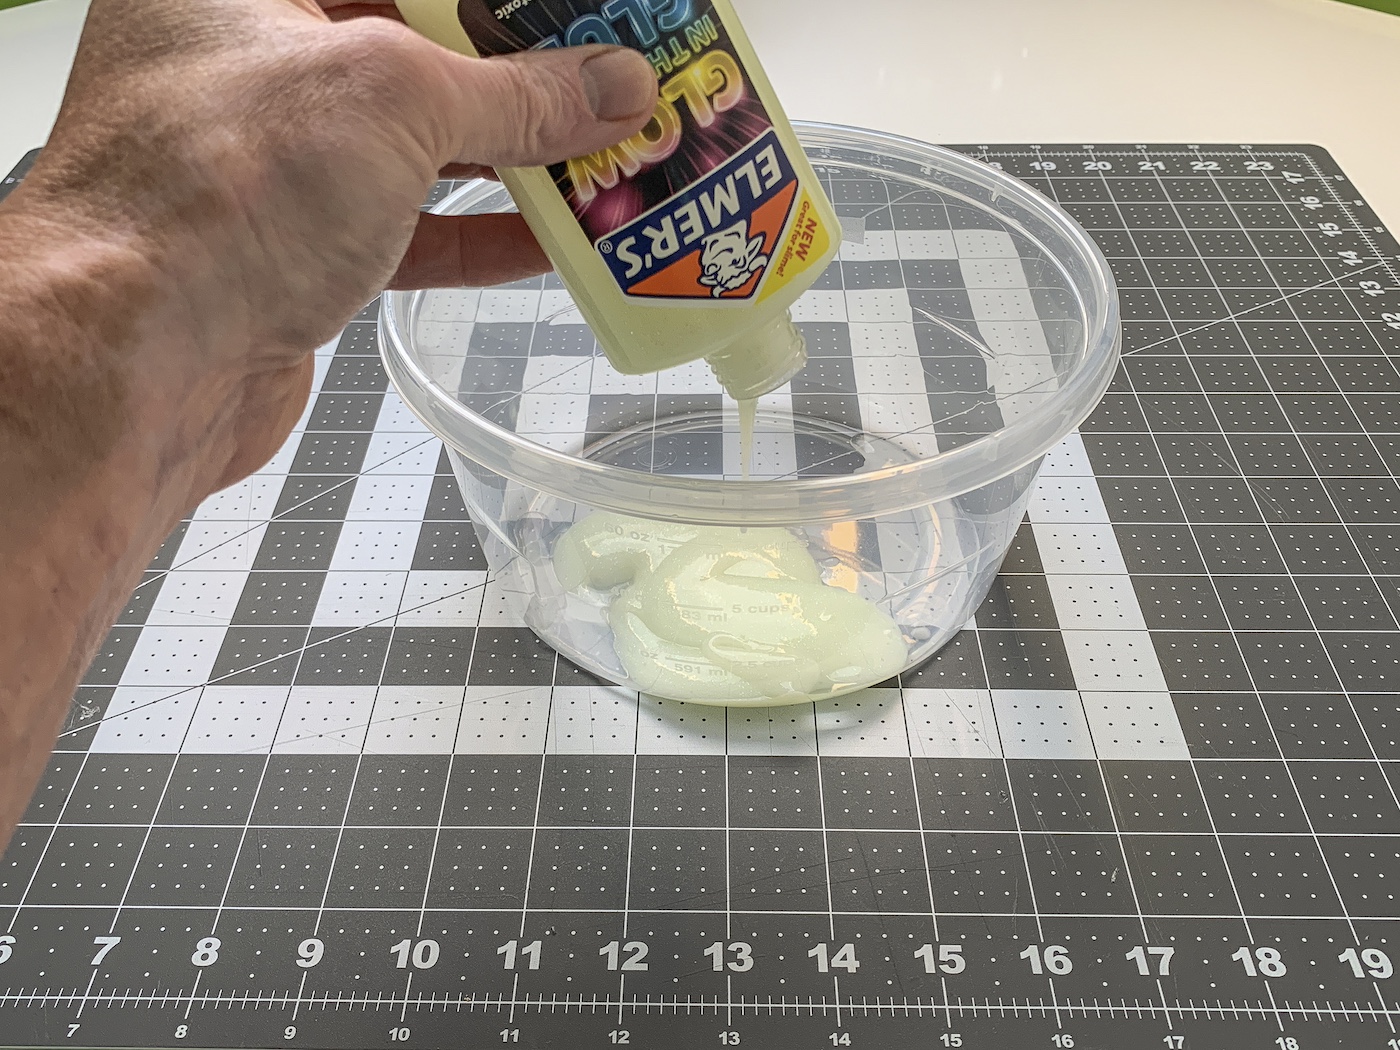 Adding the glow in the dark glue to the container